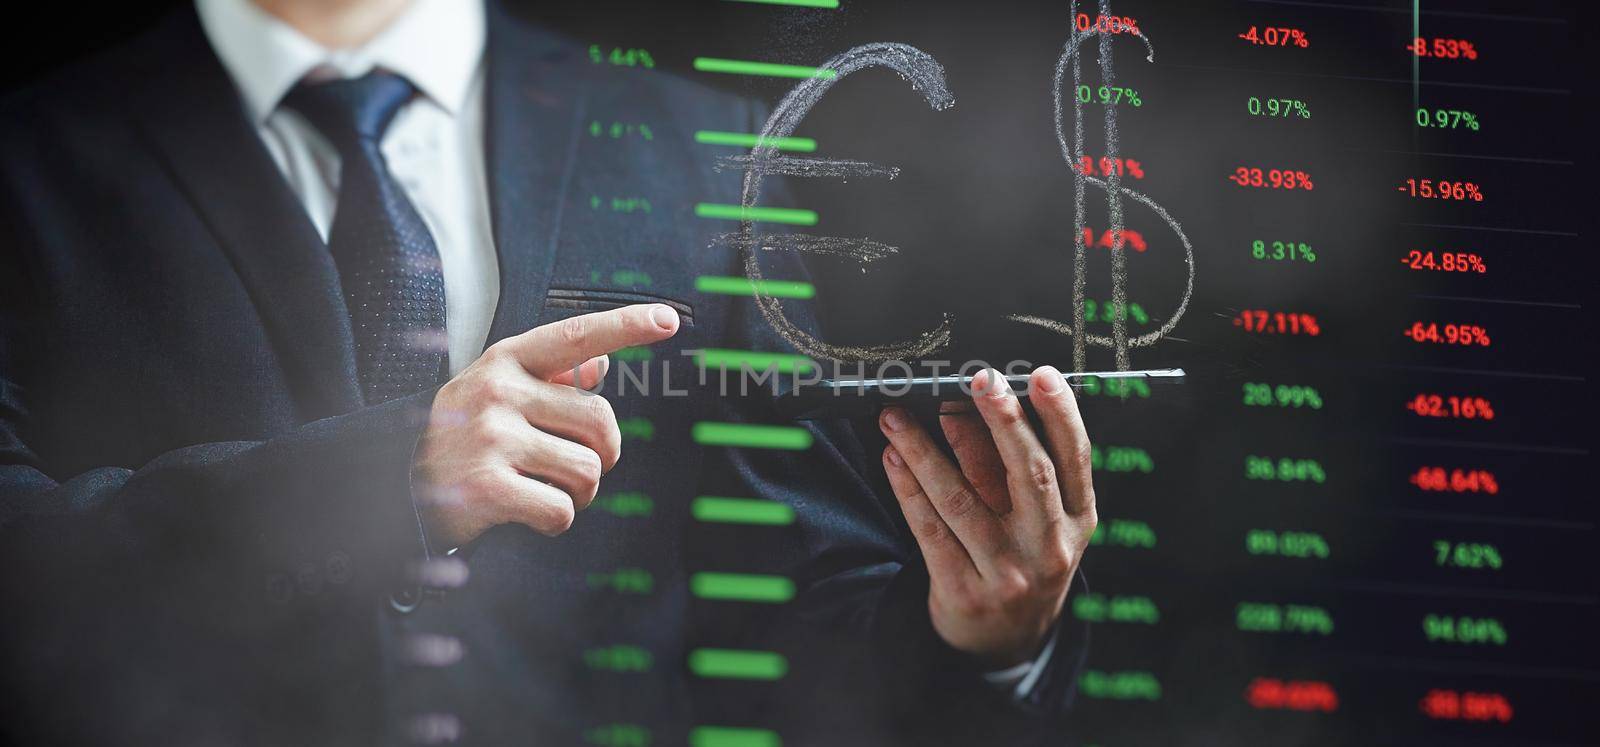 Stock market, Business growth, progress or success concept. Businessman or trader is showing a growing virtual hologram stock, invest in trading.